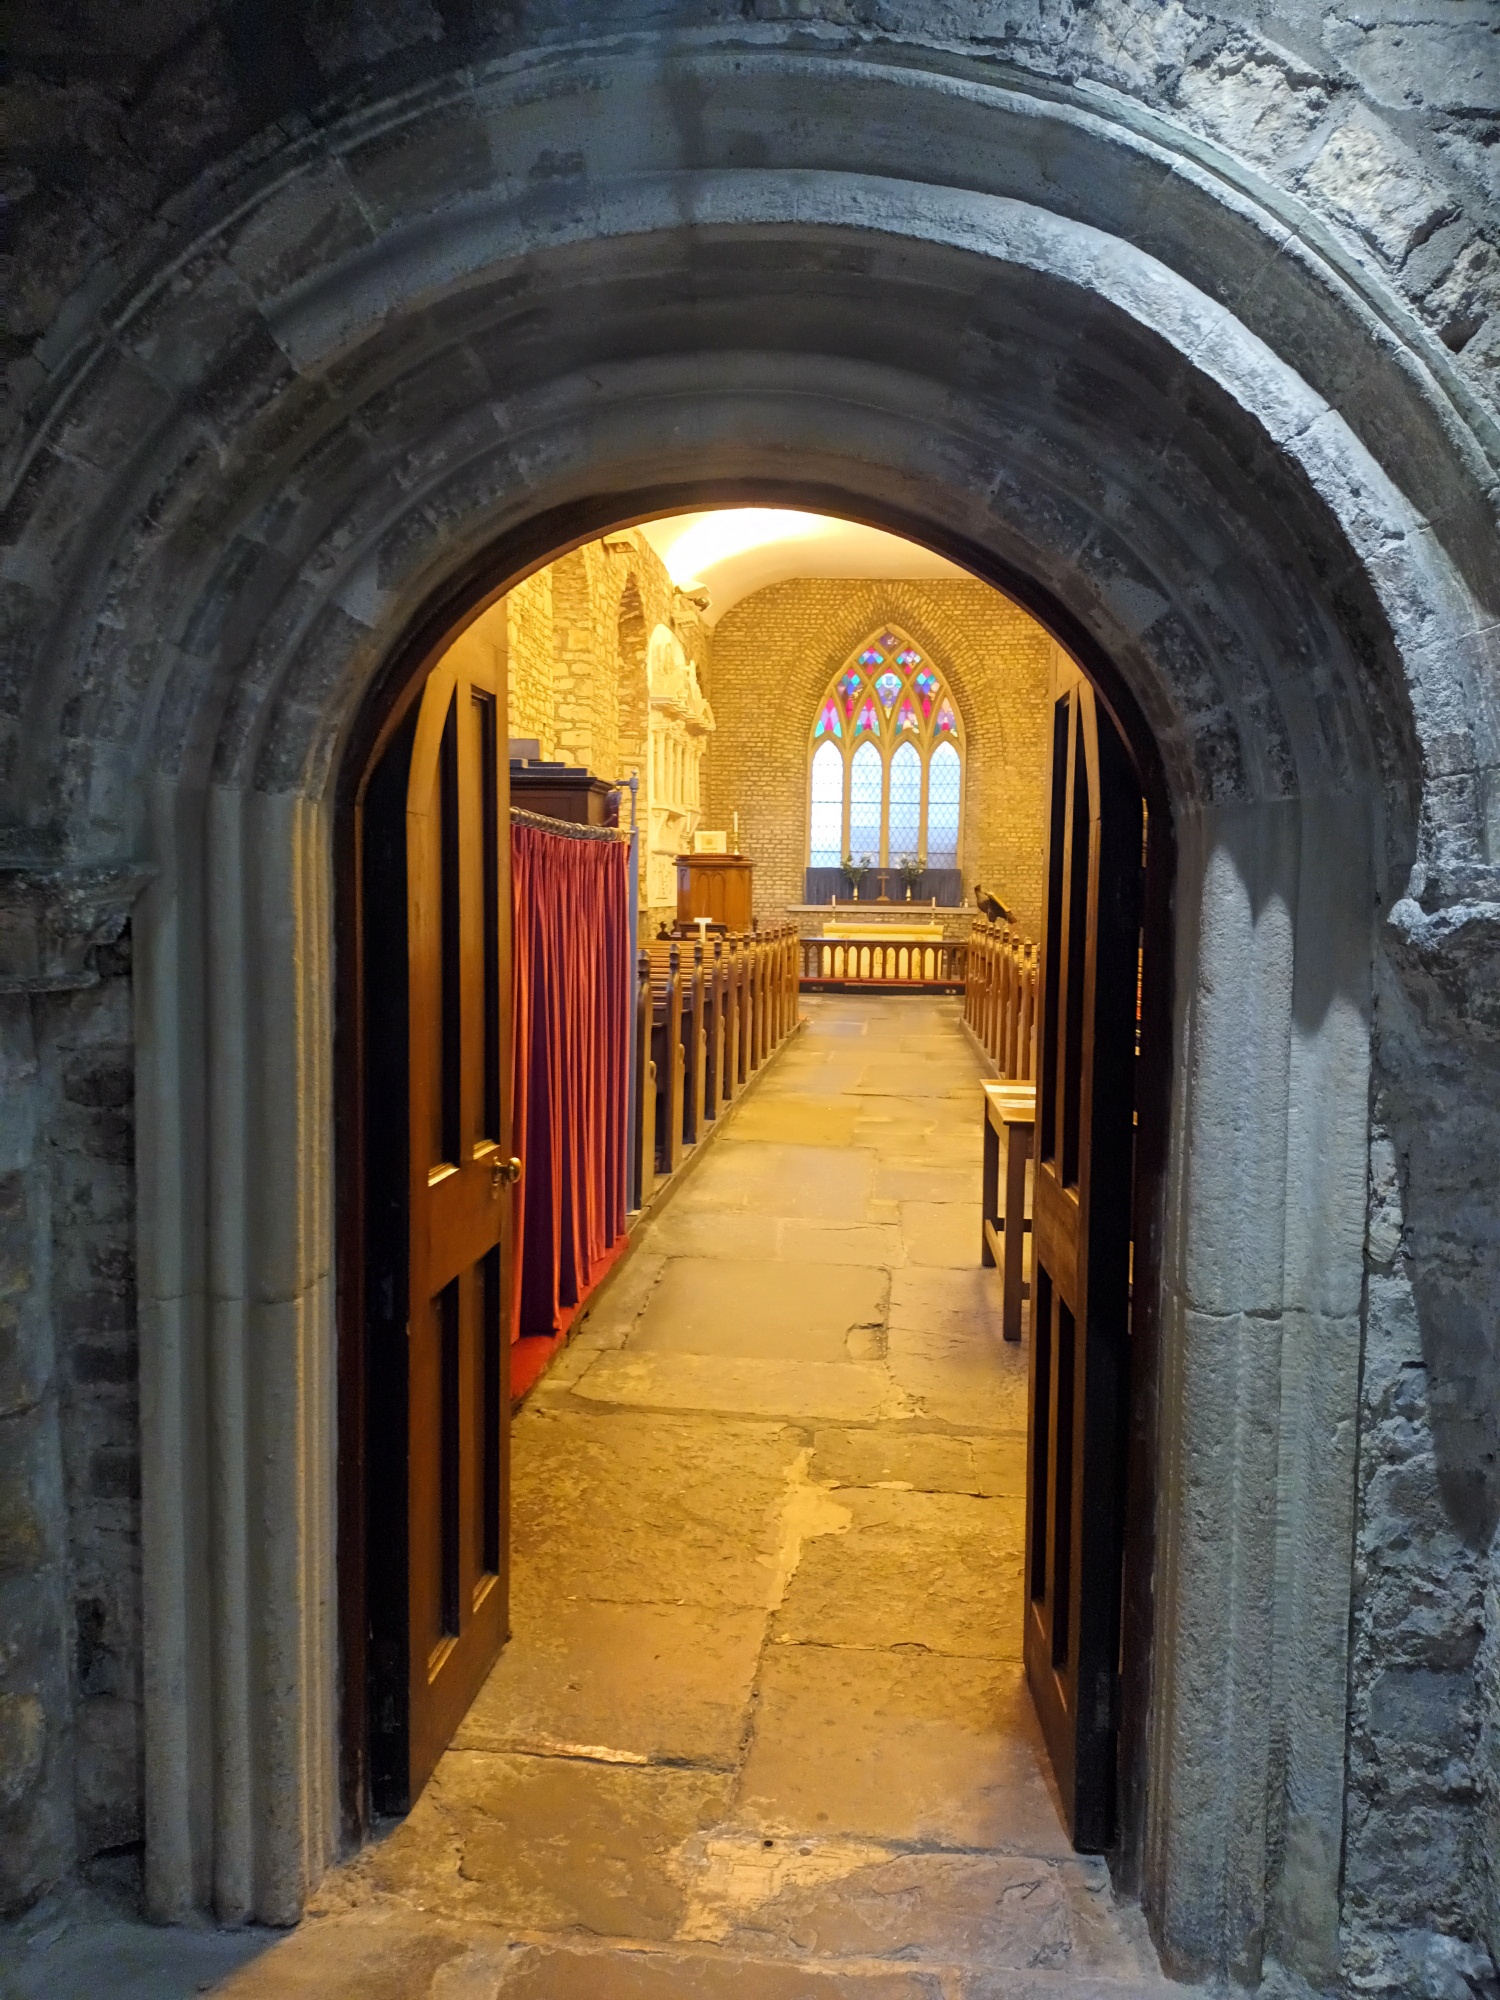 A view of the church from the porch and through the original dundry stone romanesque arch that would have been located on the original 12th century structure.